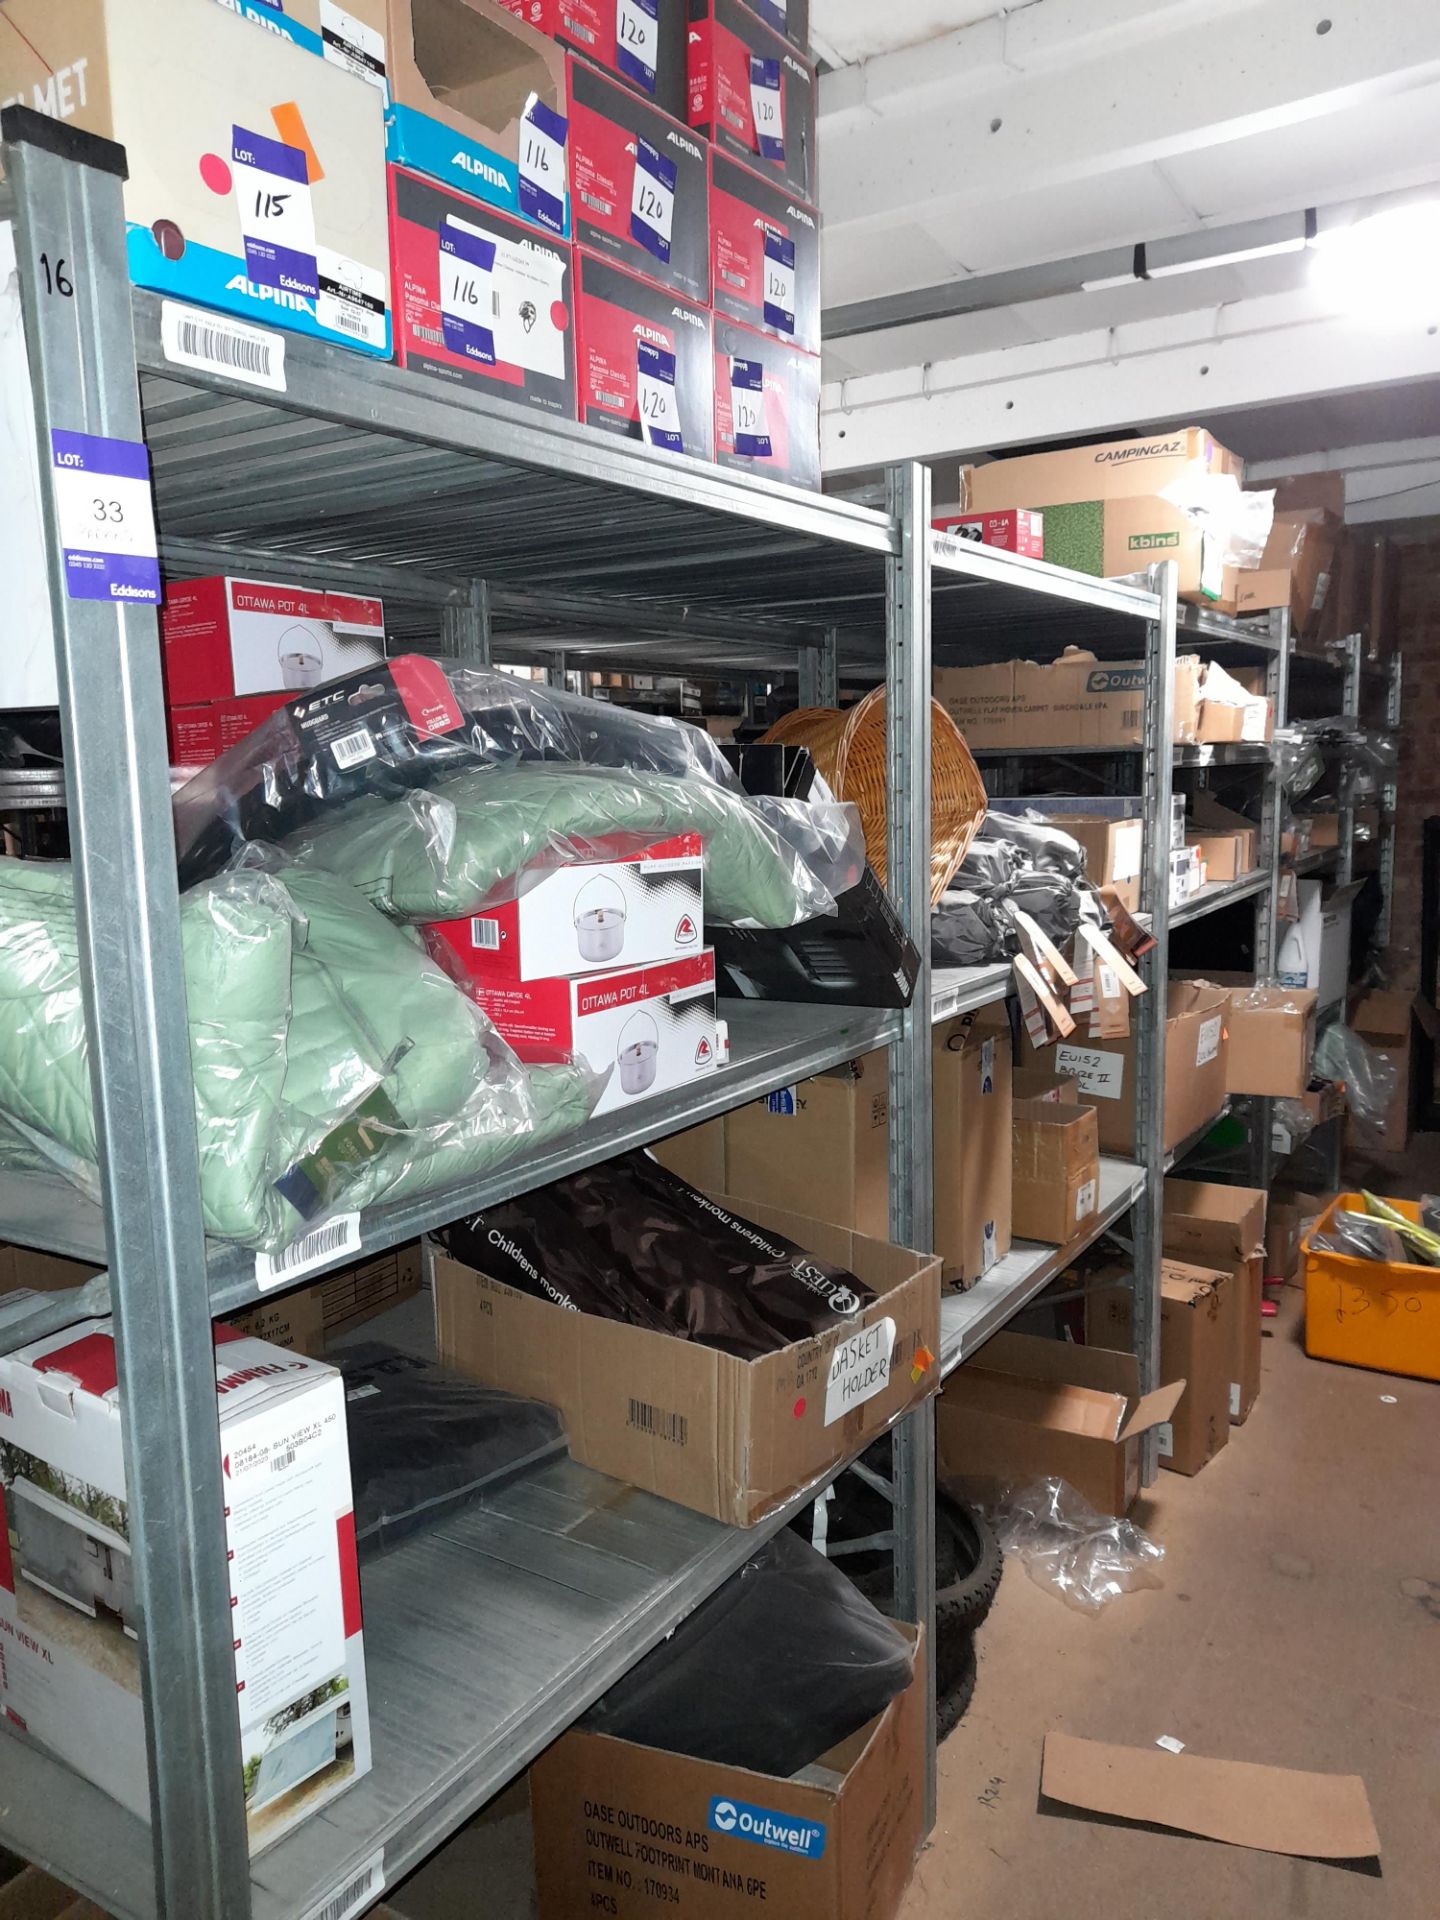 15 x Bays of Metal Shelving, located to Mezzanine (Approx. 1225W x 2000H x 800D) (Contents not